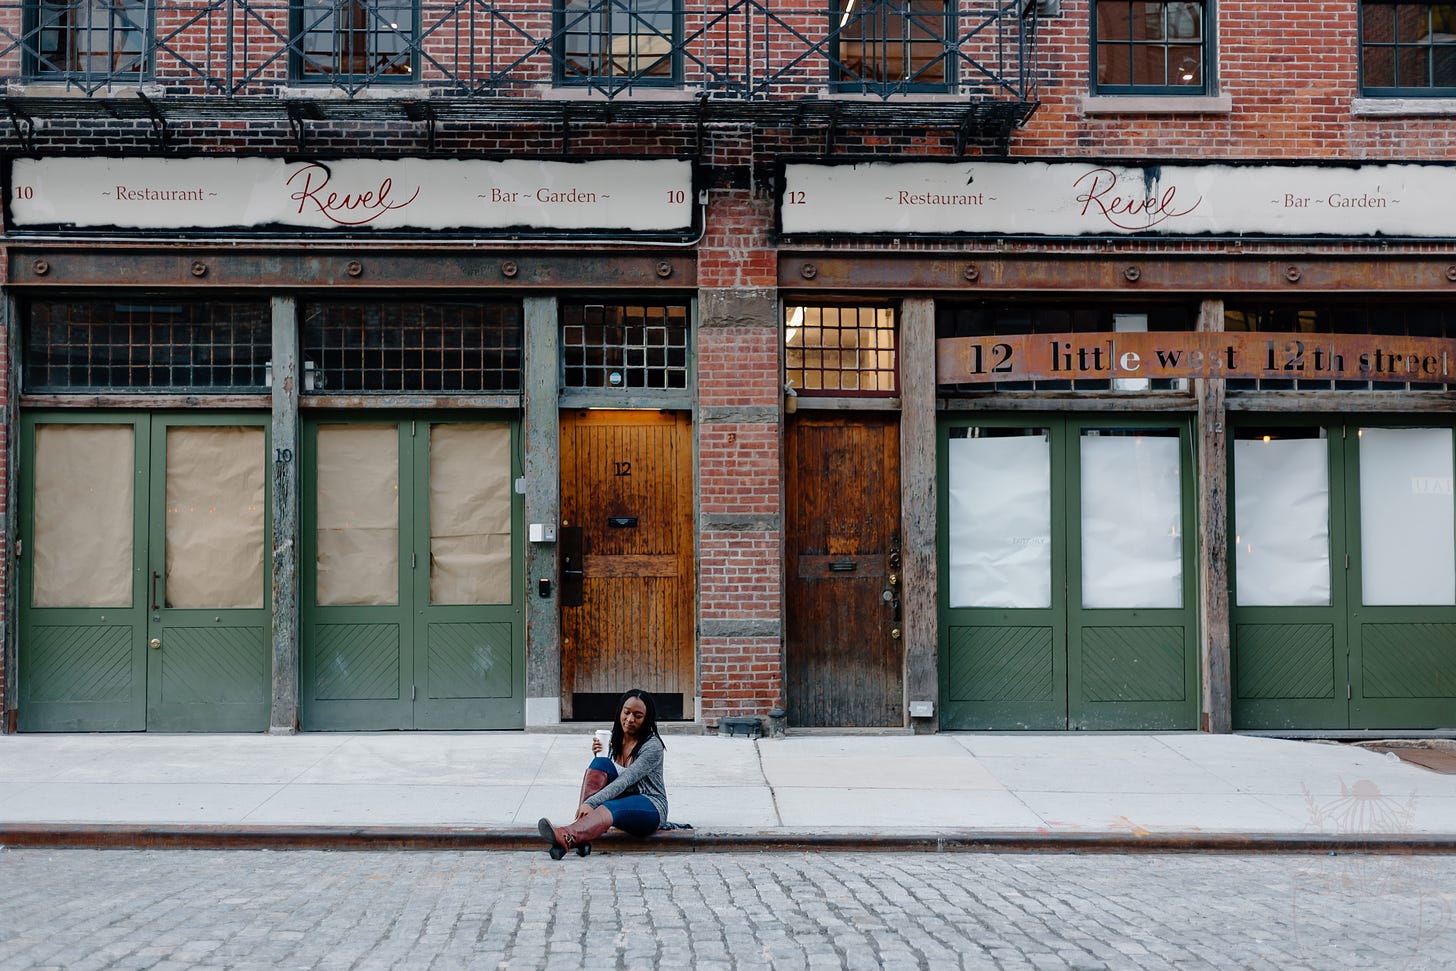  Alexa is sitting on the curb of the sidewalk holding a cup of coffee. She wears a grey sweater, jeans, and maroon boots. The buildings behind her appear to be boarded up with paper on the windows. The storefront signs say “Revel” and “little west 12th street” The doors behind her are a mix of green, and copper wood. You can also see lots of exposed brick. 